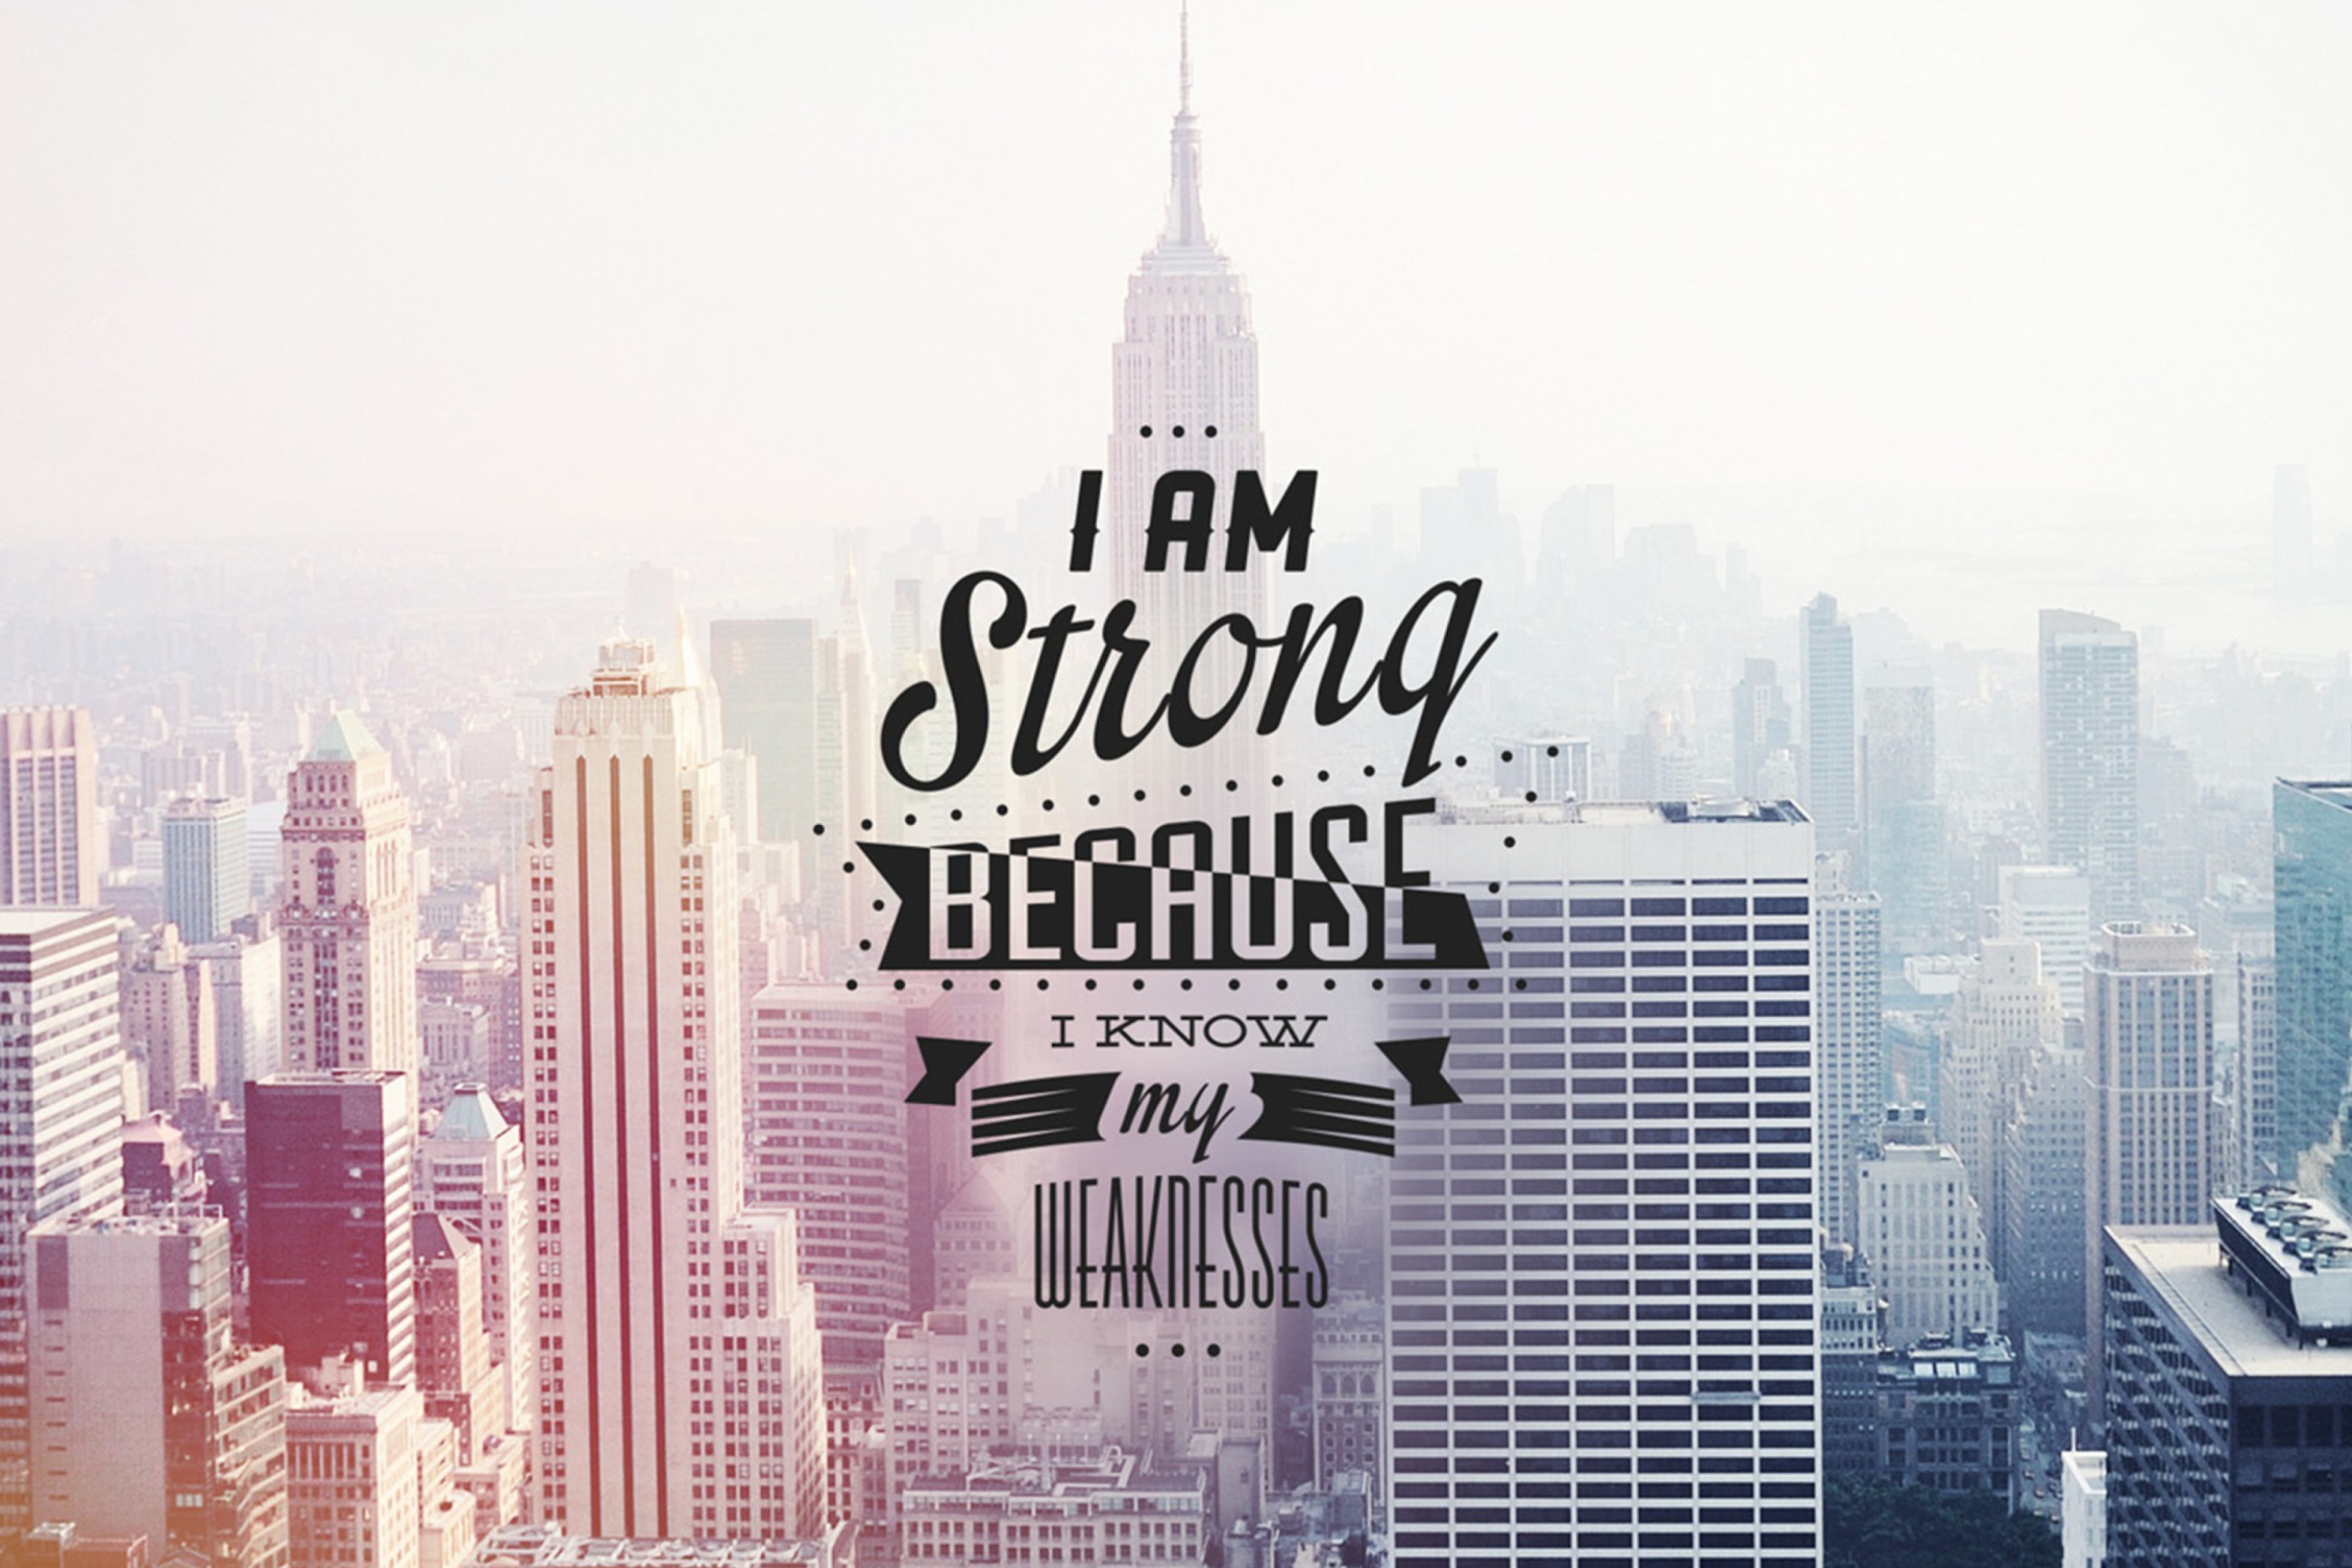 I am strong because i know my weakness wallpaper 2880x1920